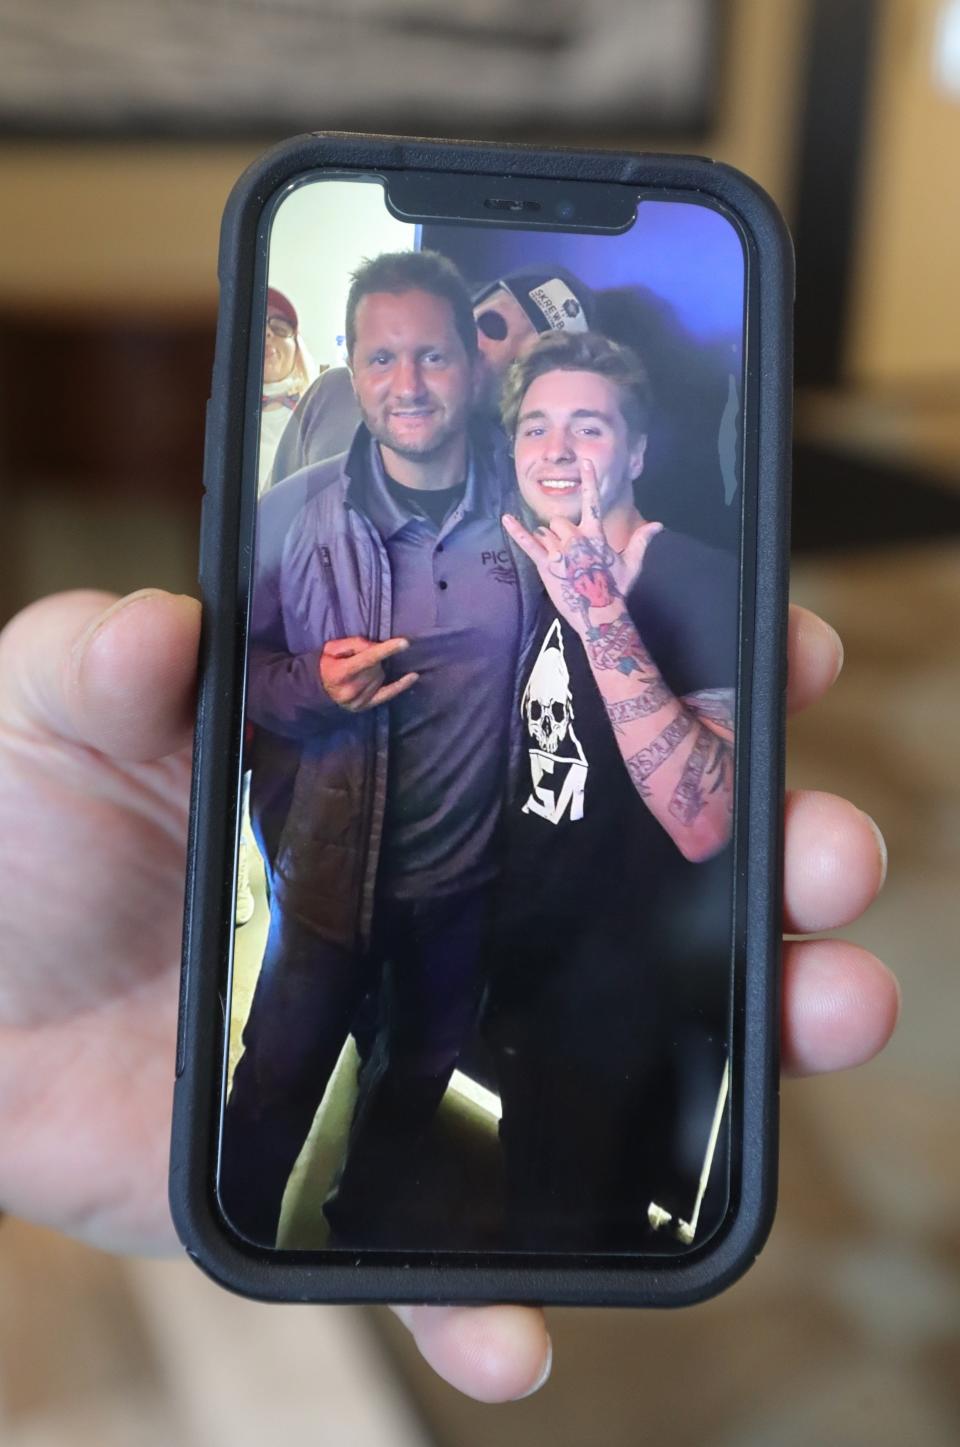 Donnie Boyer, owner of Pick's at Portage Lakes, shows a cellphone photo of himself, left, and Sebastian Spencer, who died in an ATV accident in February 2021.